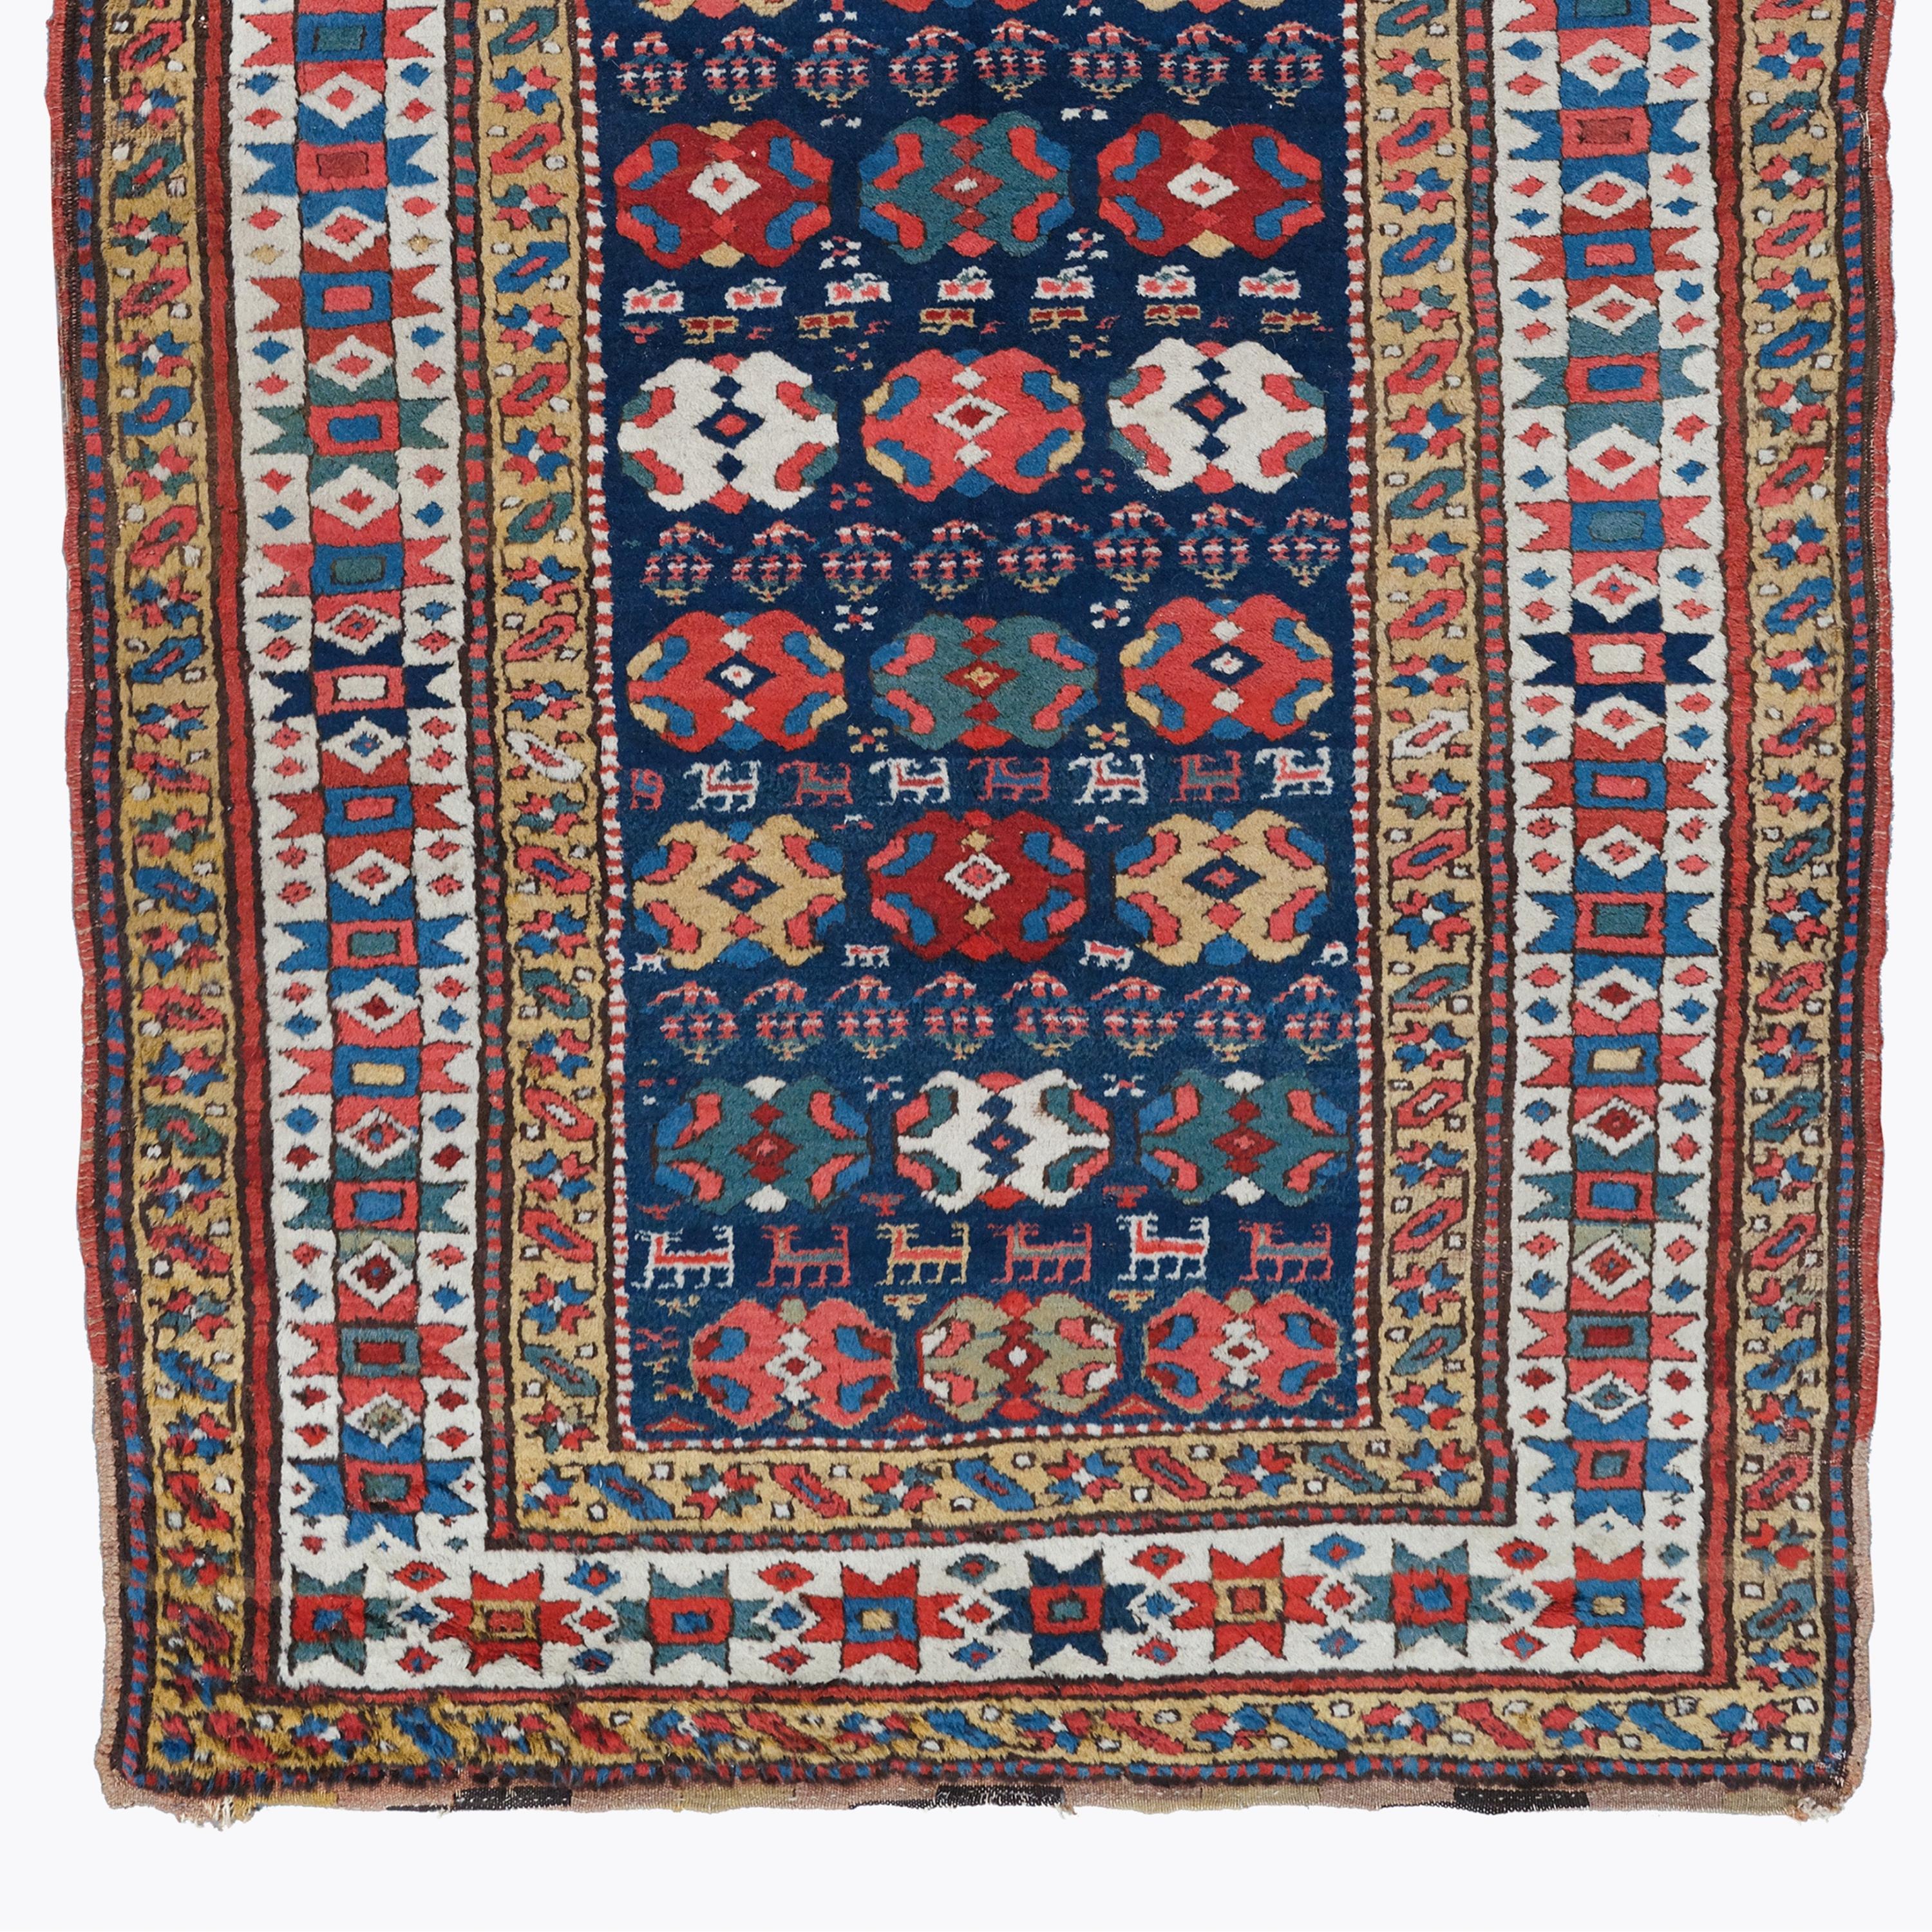 Antique Shahsevan Long Rug
19th Century Caucasian Shahsevan Long Rug
Size: 118×280 cm  3,87x9,18 Ft

This 19th century Caucasian Shahsevan carpet adds nobility to any space with its historical texture and rich color palette. Its geometric patterns